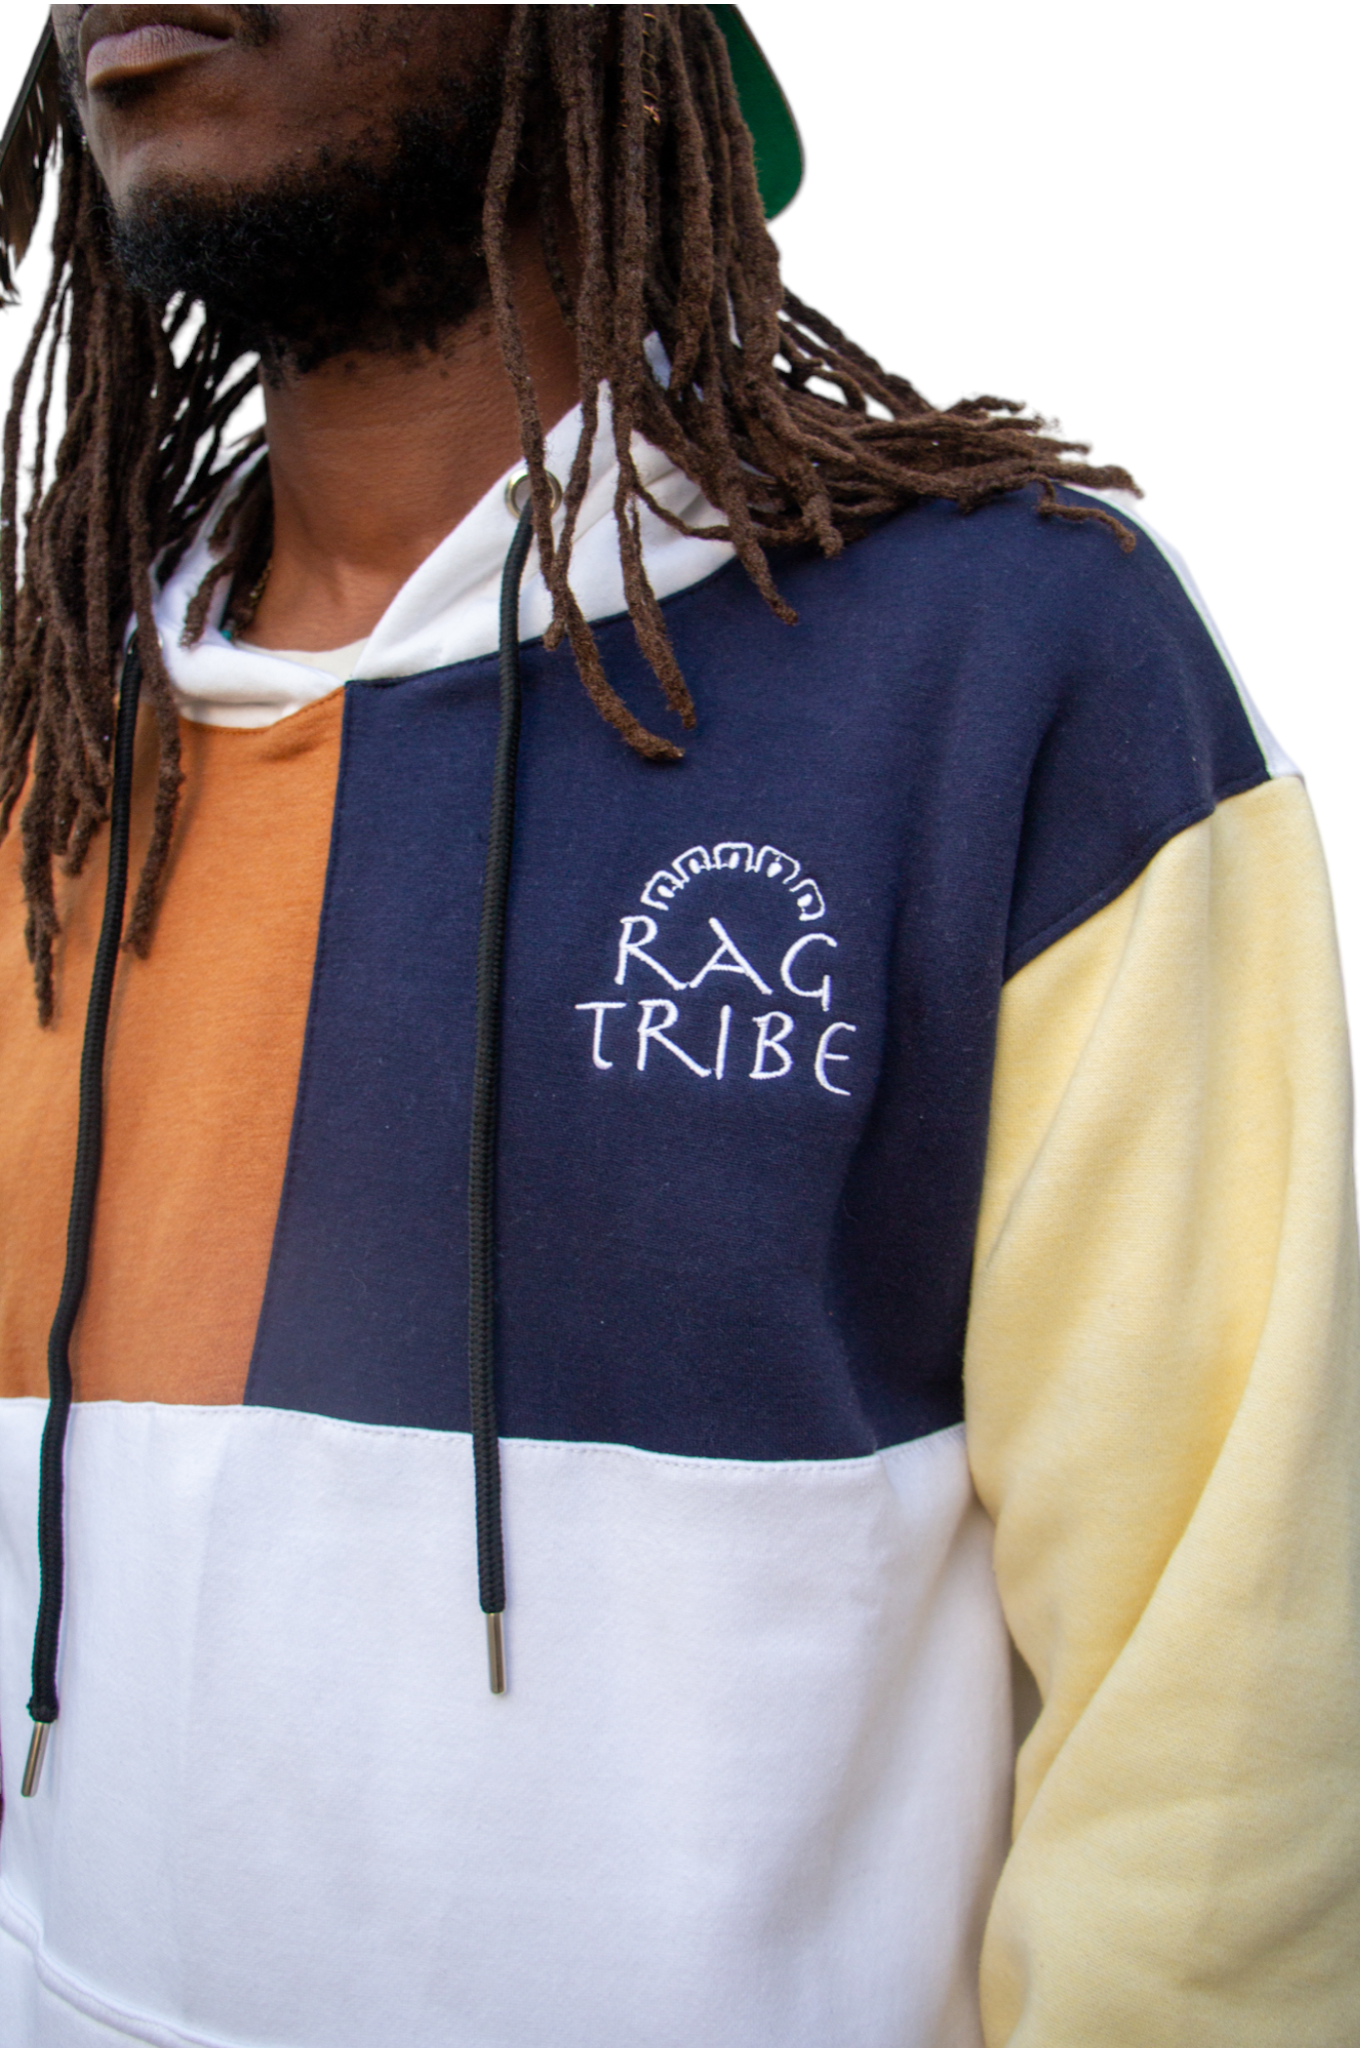 Raise the Vibe Crop Hoodie  Ragtribe – Ragtribe Ethical Clothing